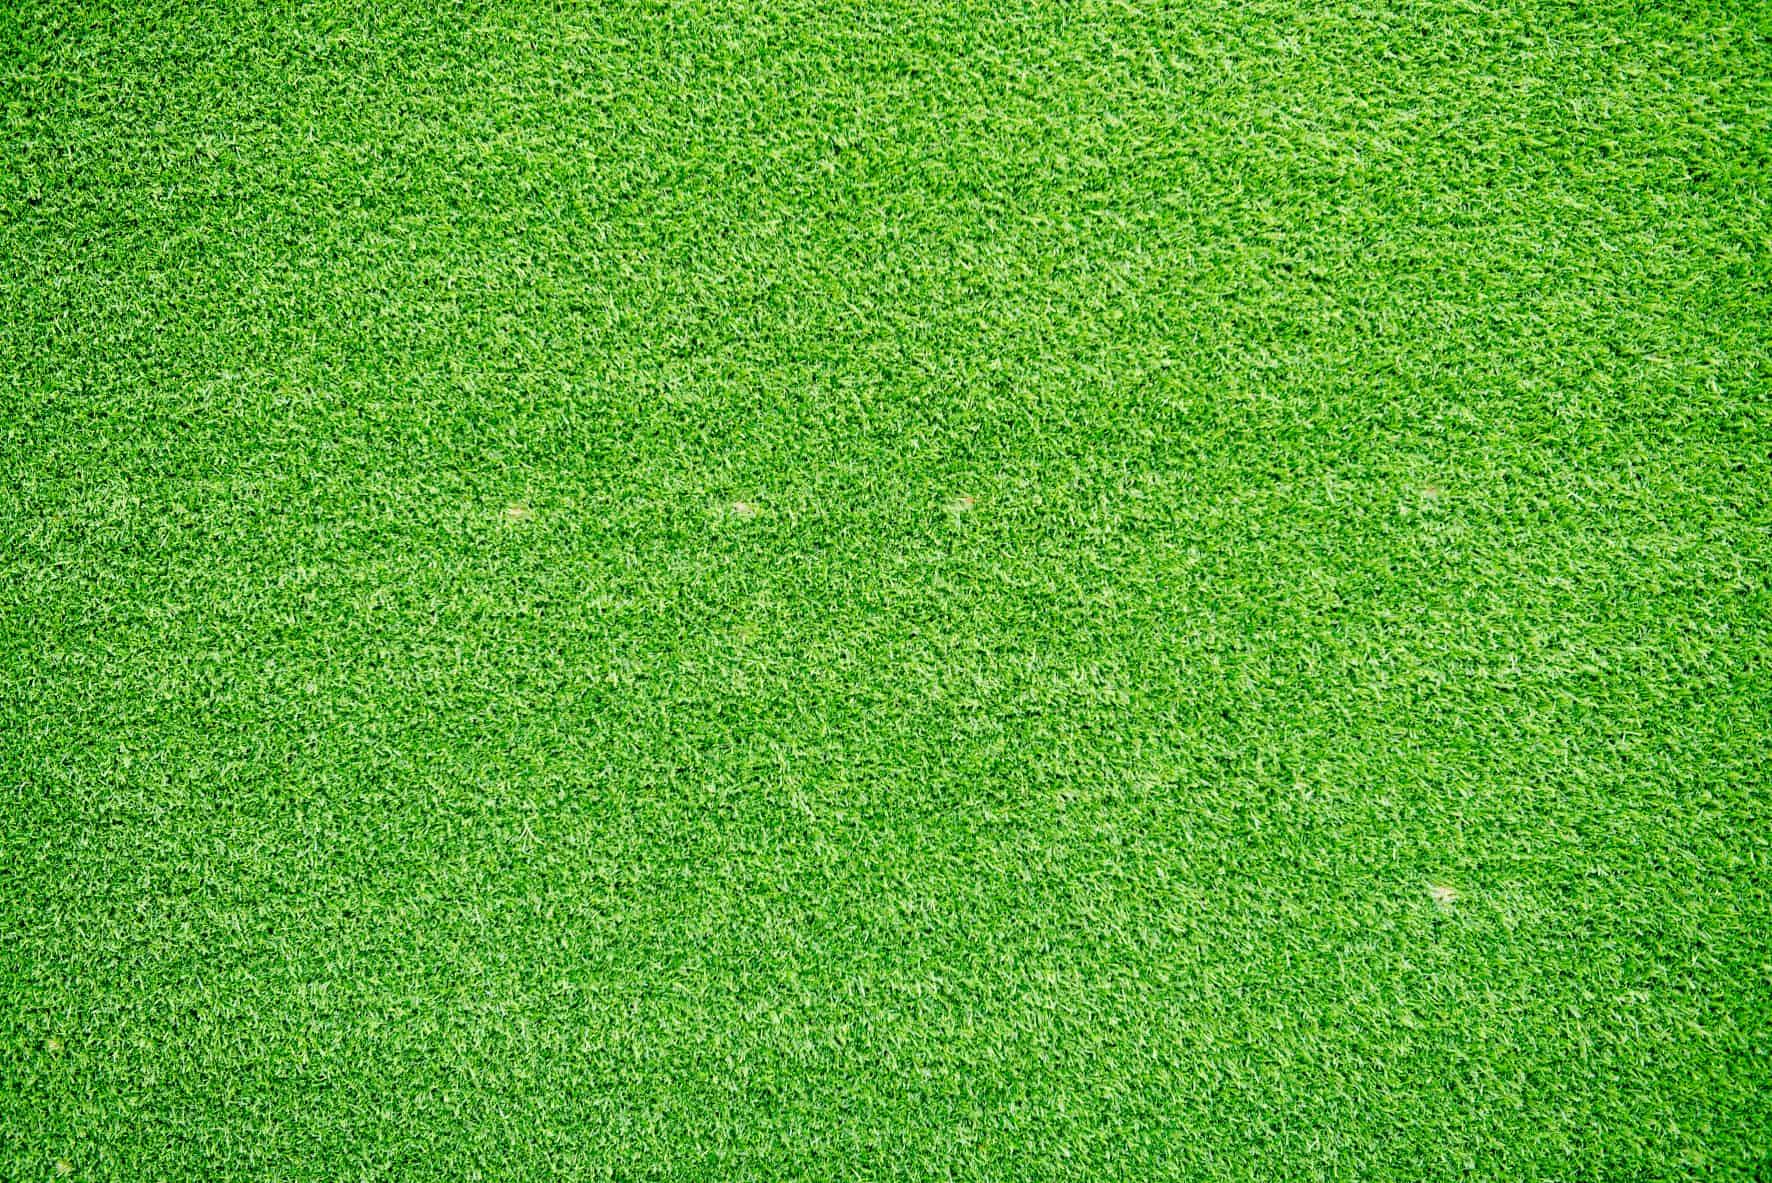 What Goes Into Managing Your Sports Field Turf?